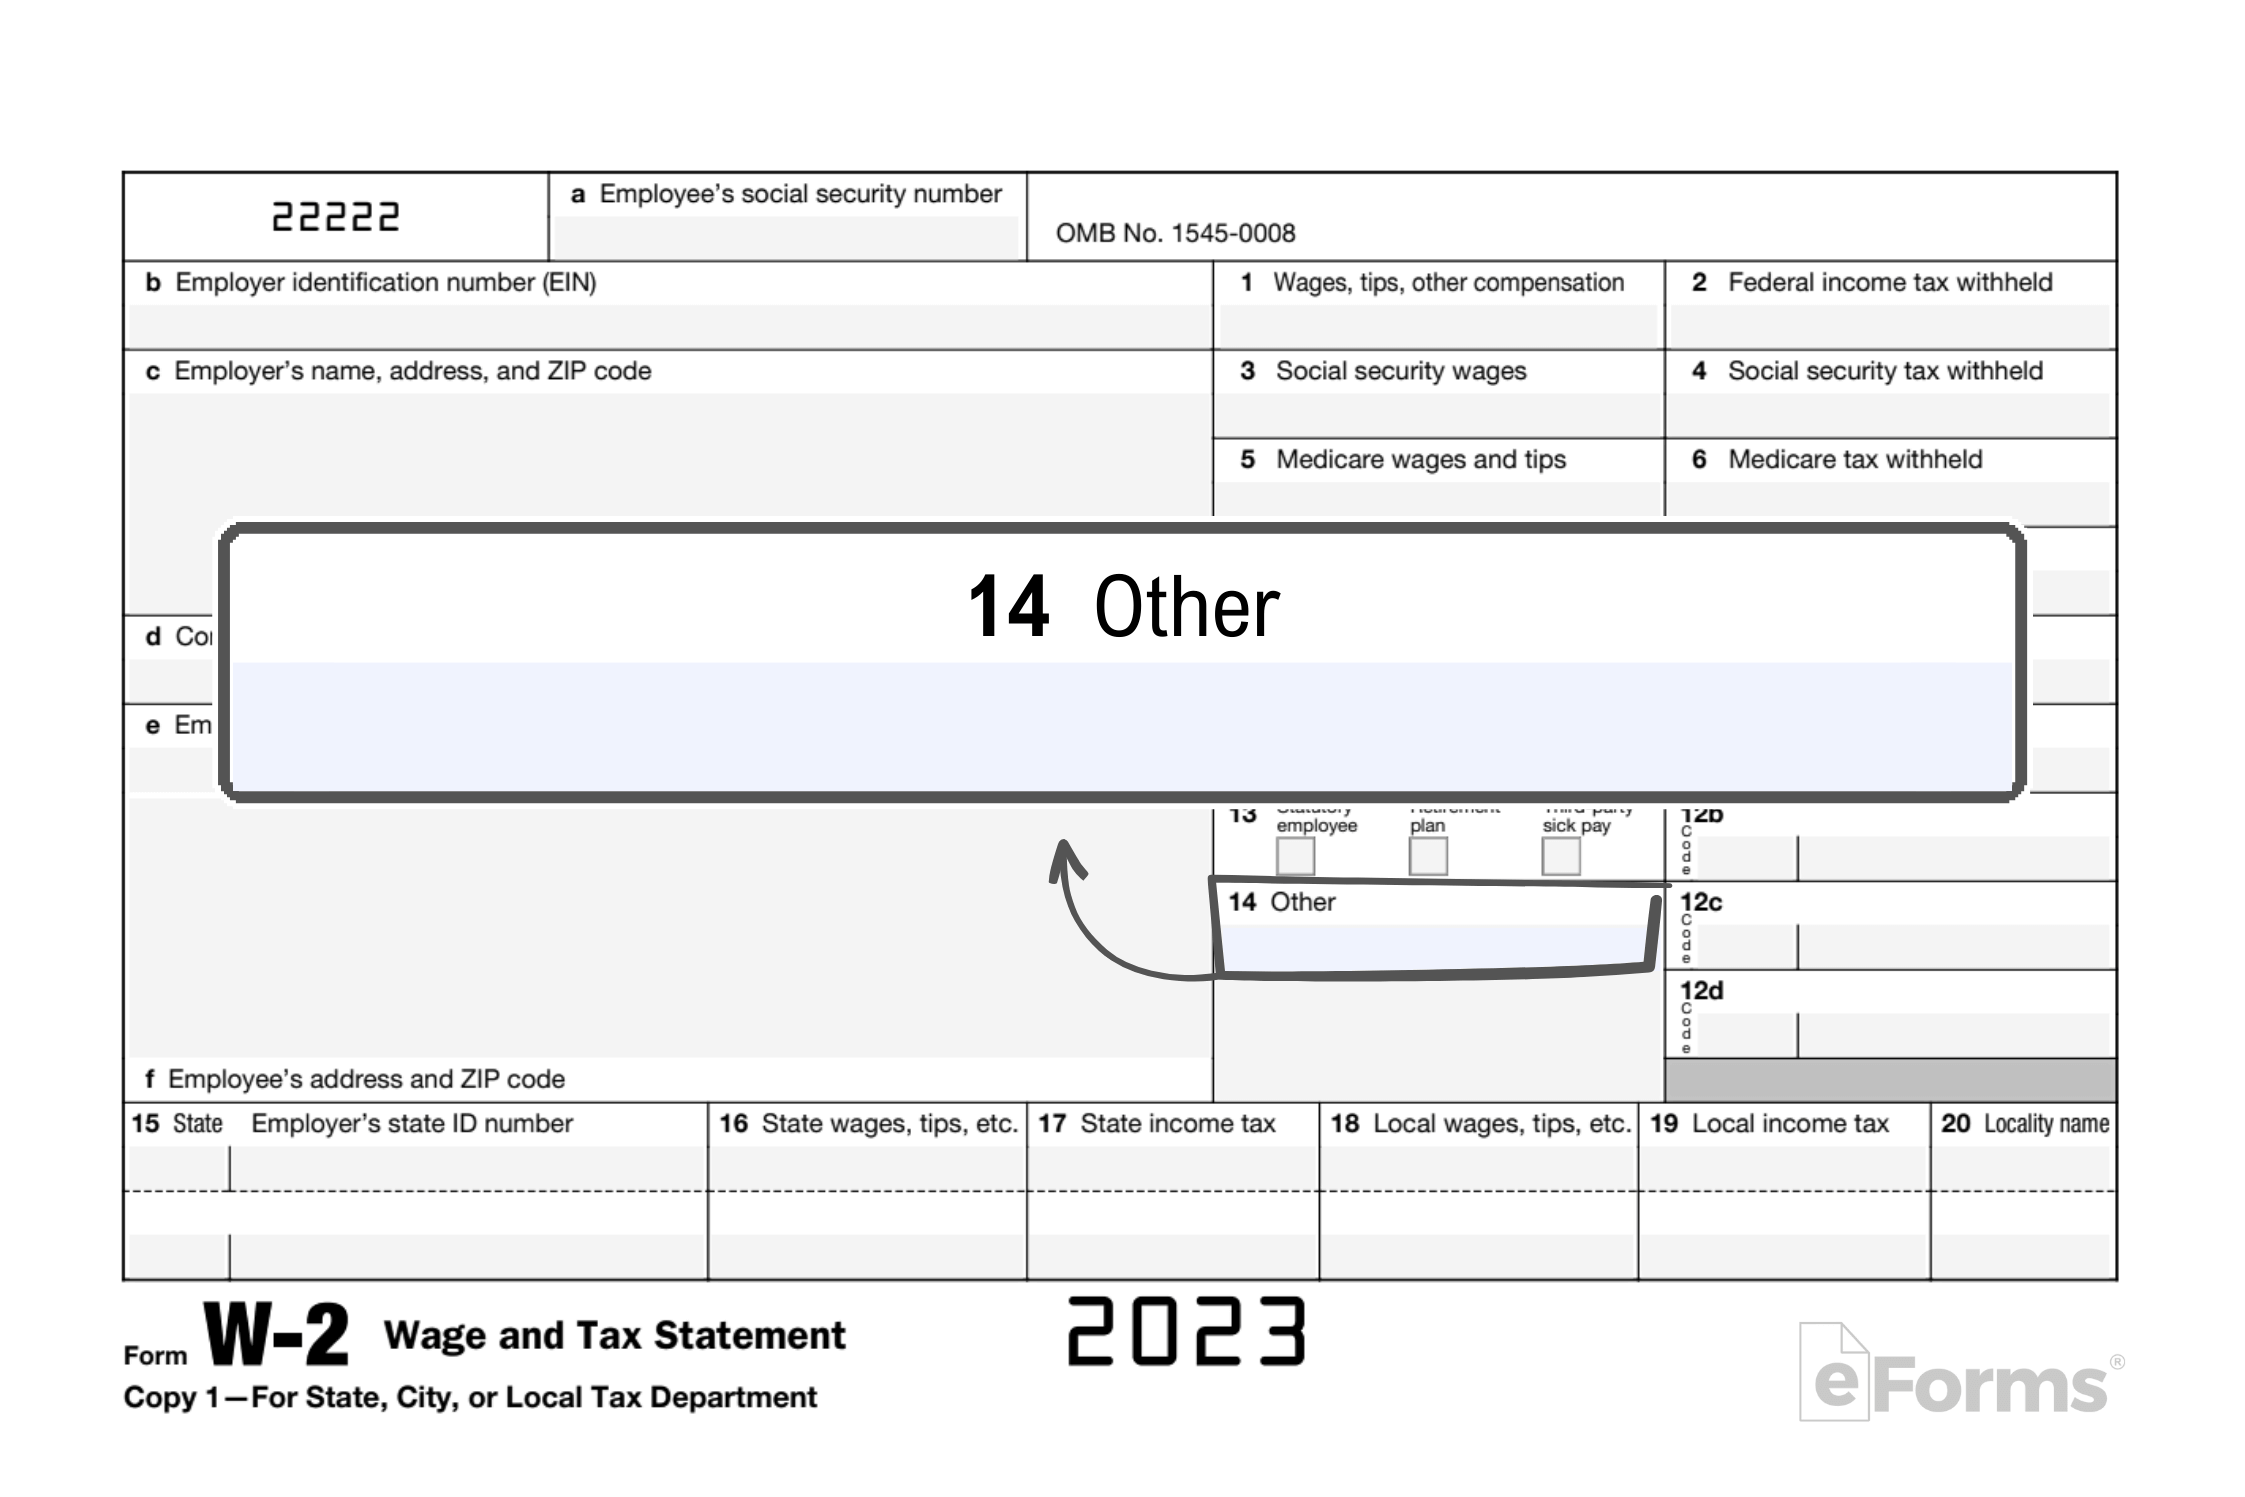 Free Irs Form W-2 | Wage And Tax Statement - Pdf – Eforms pertaining to 2023 W2 Form